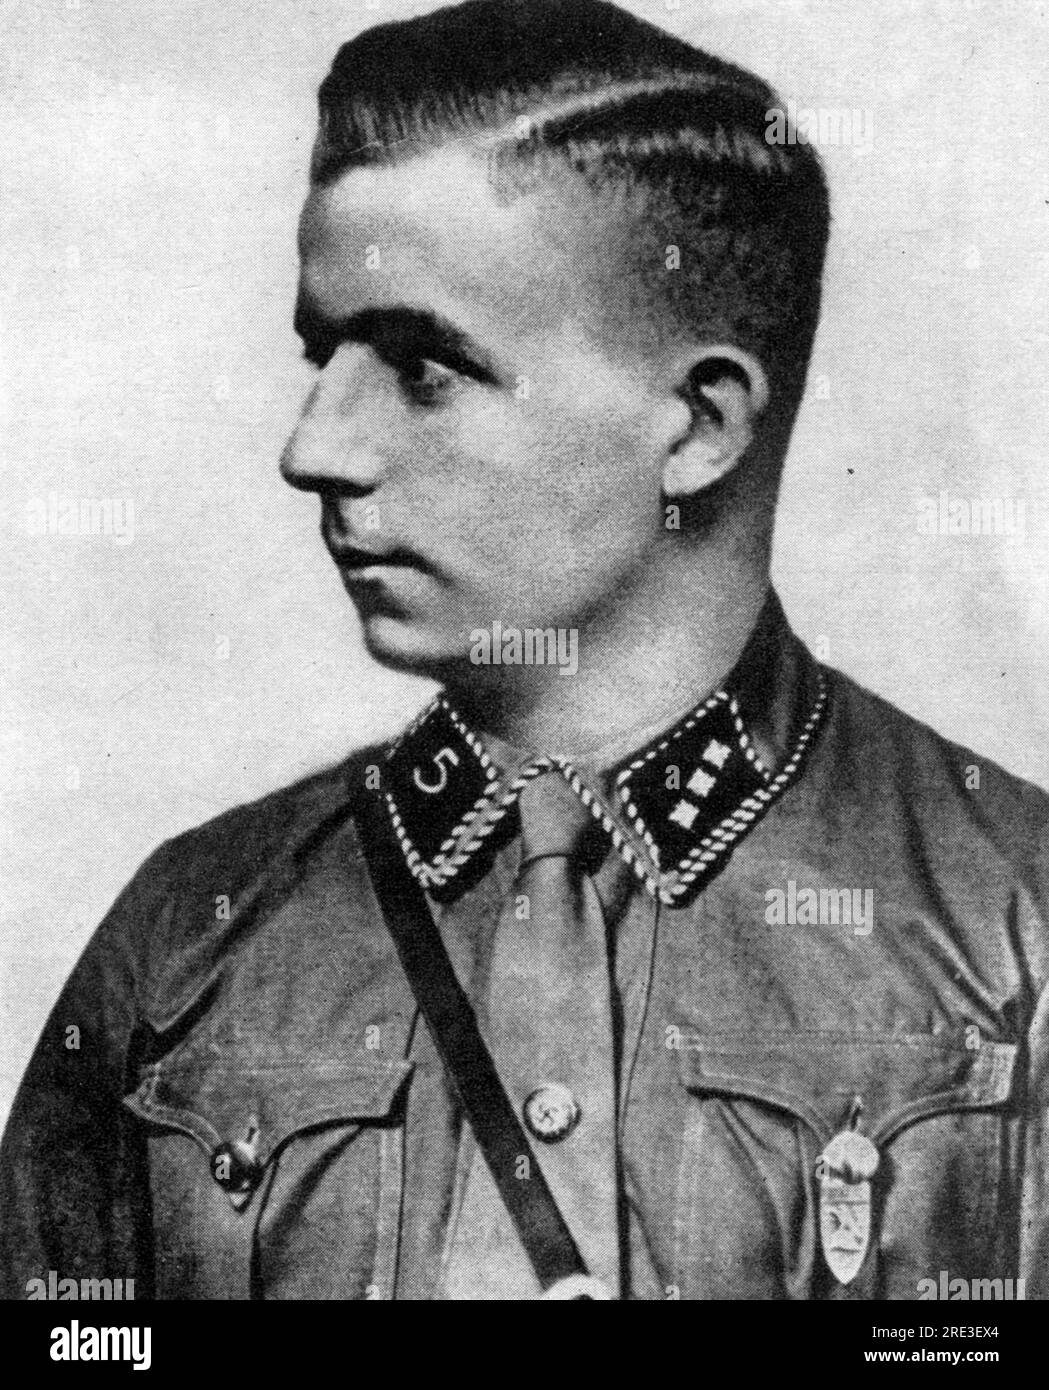 Wessel, Horst, 9.10.1907 - 23.2 1930, German student and SA Officer, 'Martyr' of the NSDAP, as SA Sturmfuehrer 1929, EDITORIAL-USE-ONLY Stock Photo